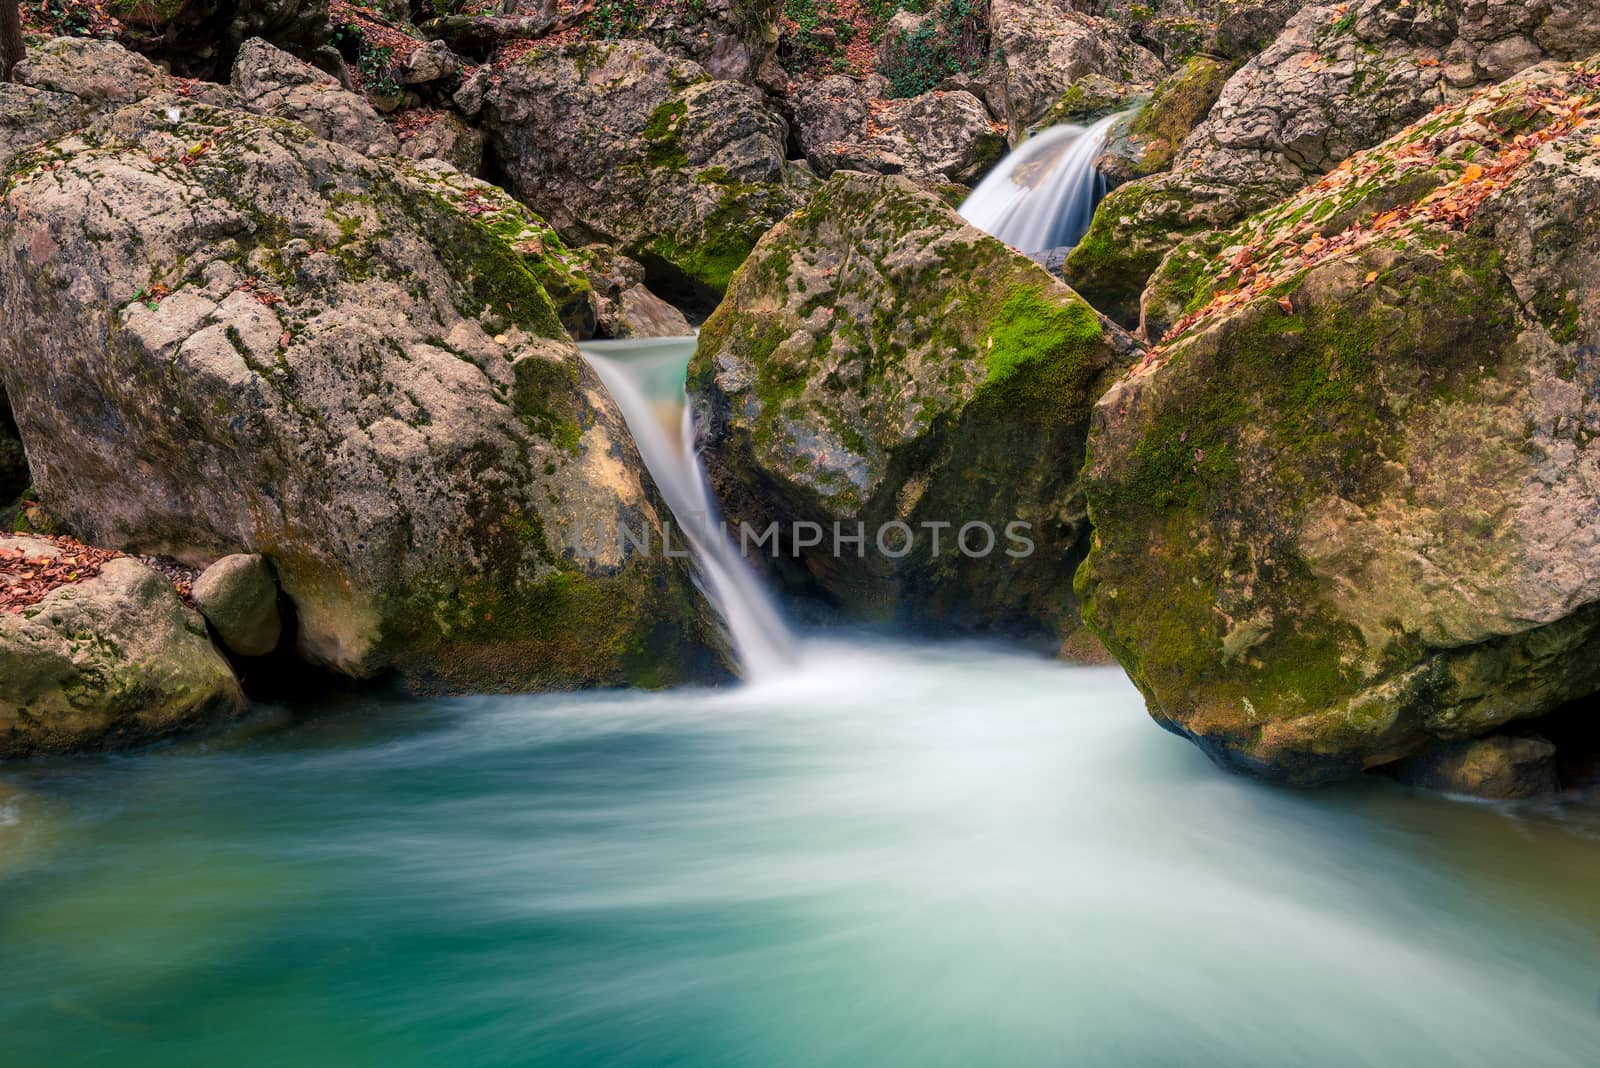 Beautifully flowing water between stones in the mountains, boulders covered with moss, beautiful nature